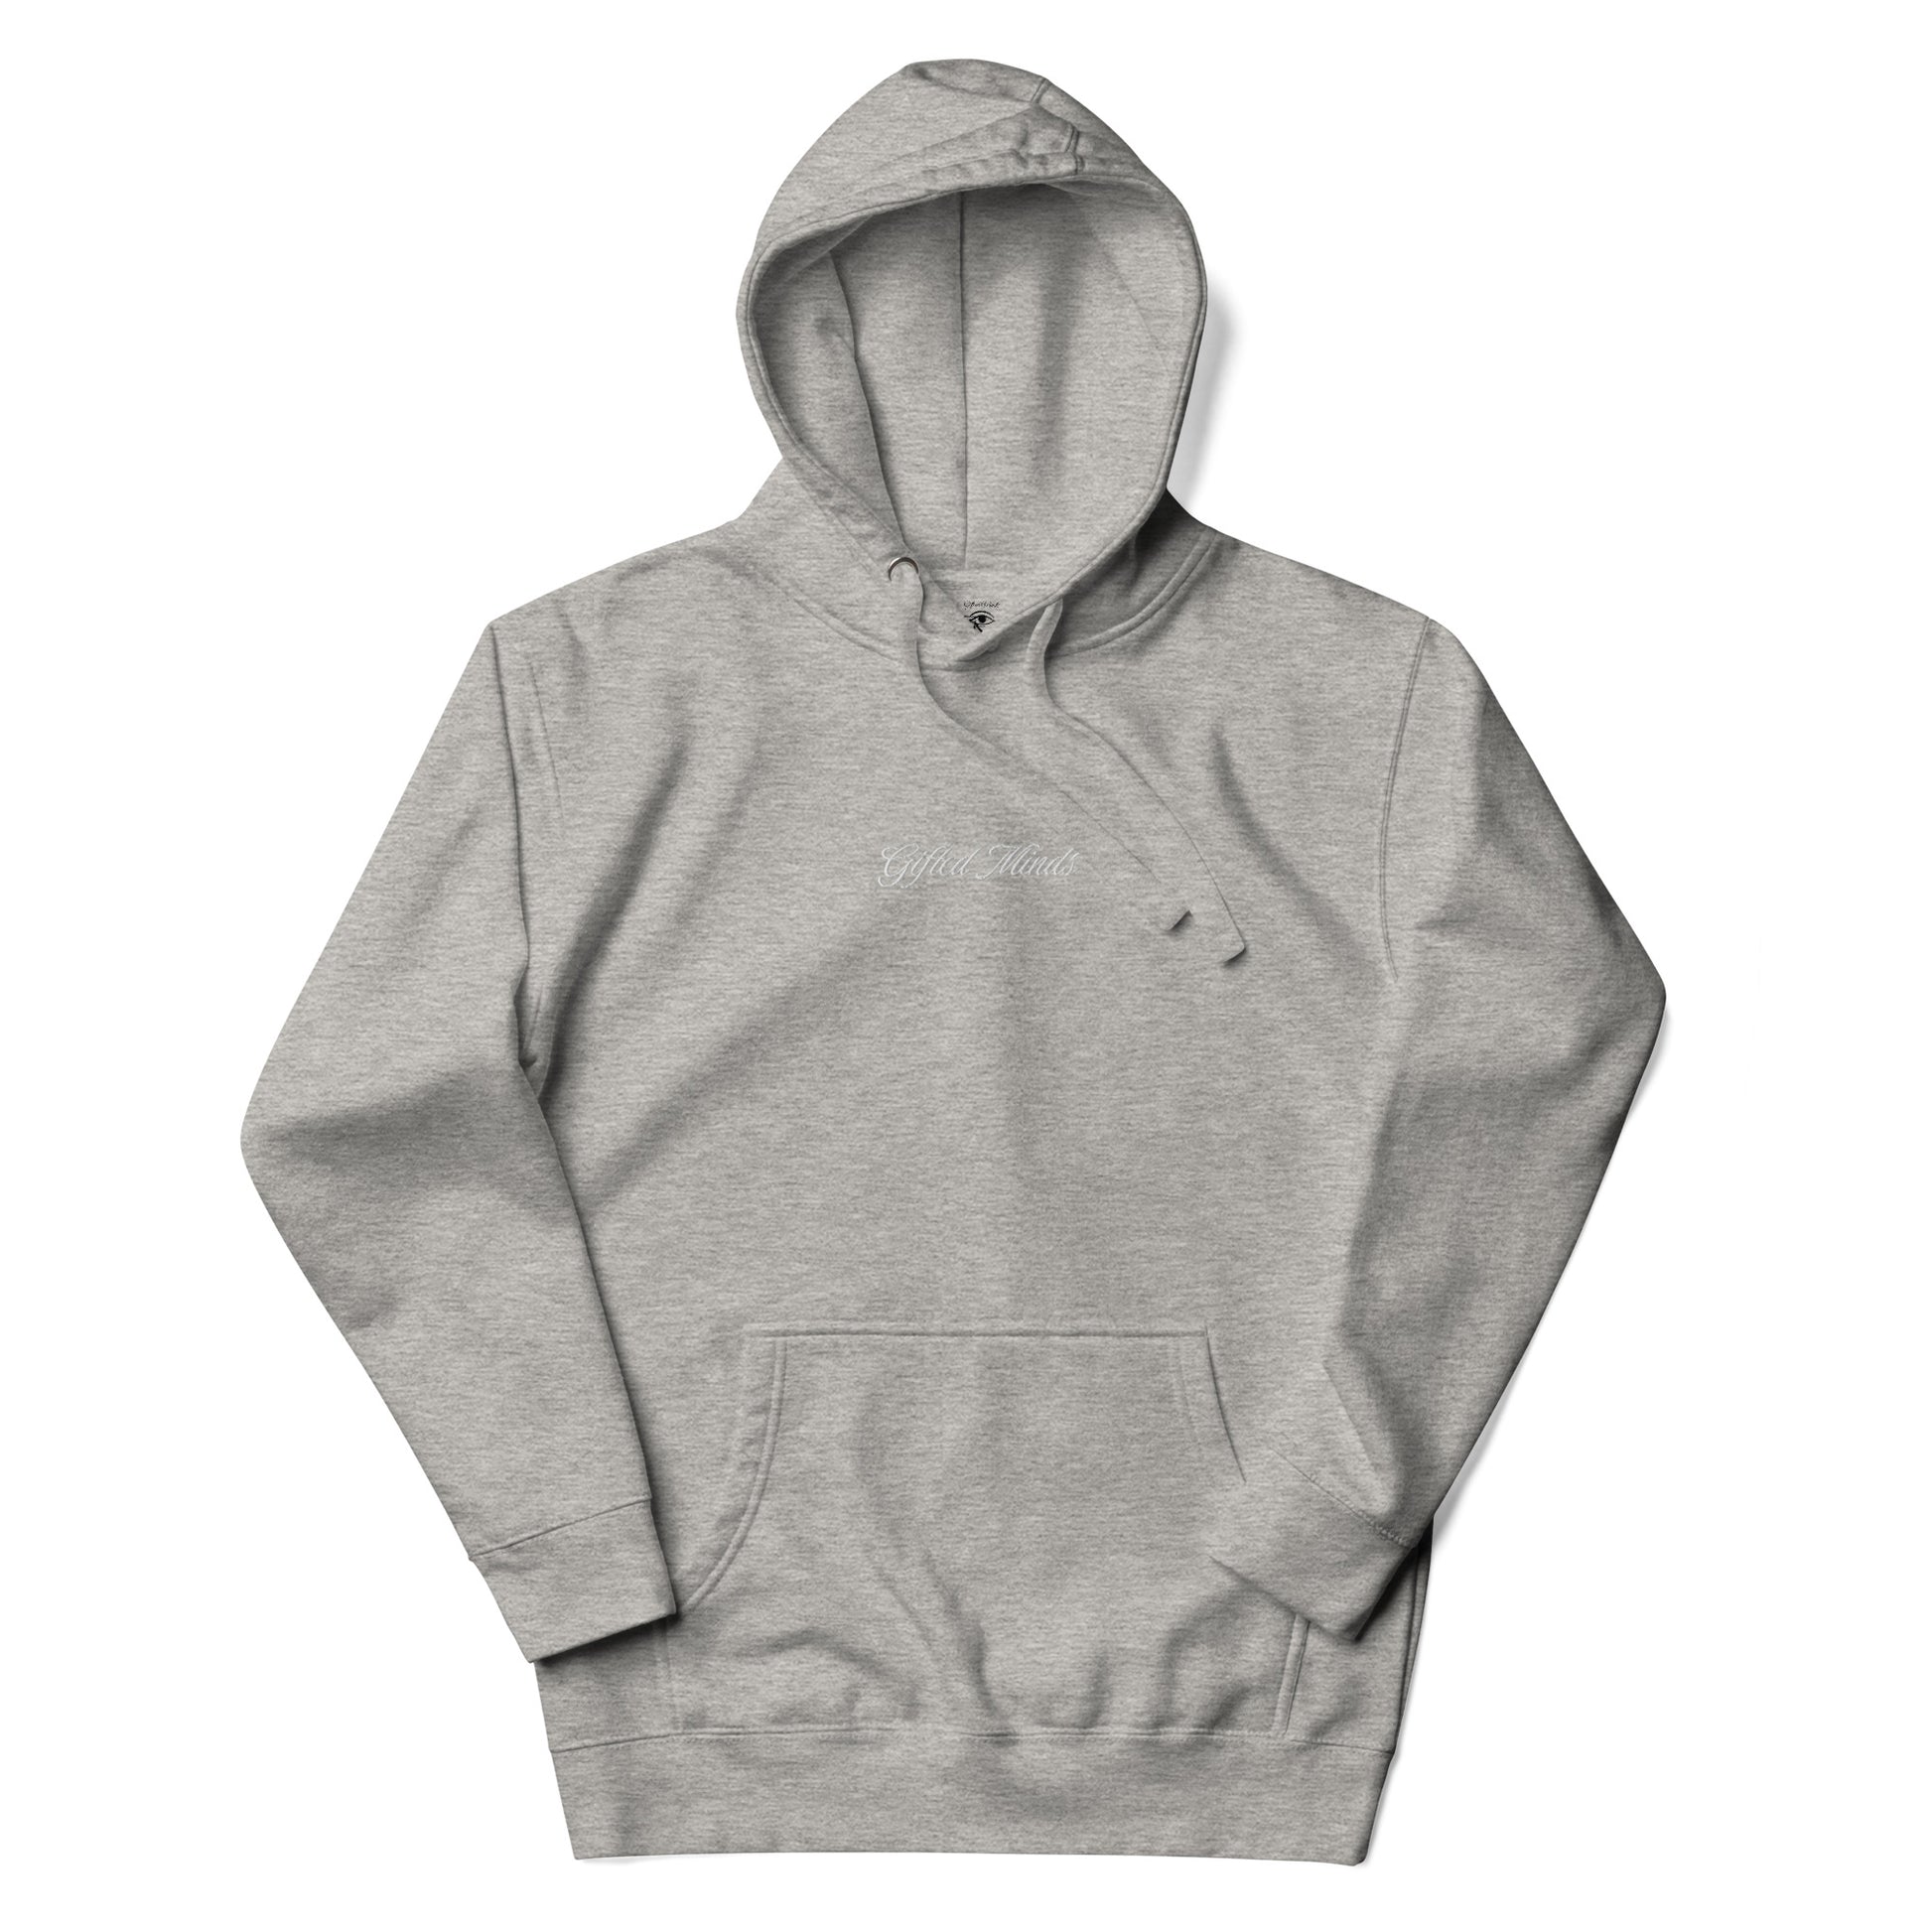 Gifted Minds Stitched Embroidery Hoodie - GFTD MNDS